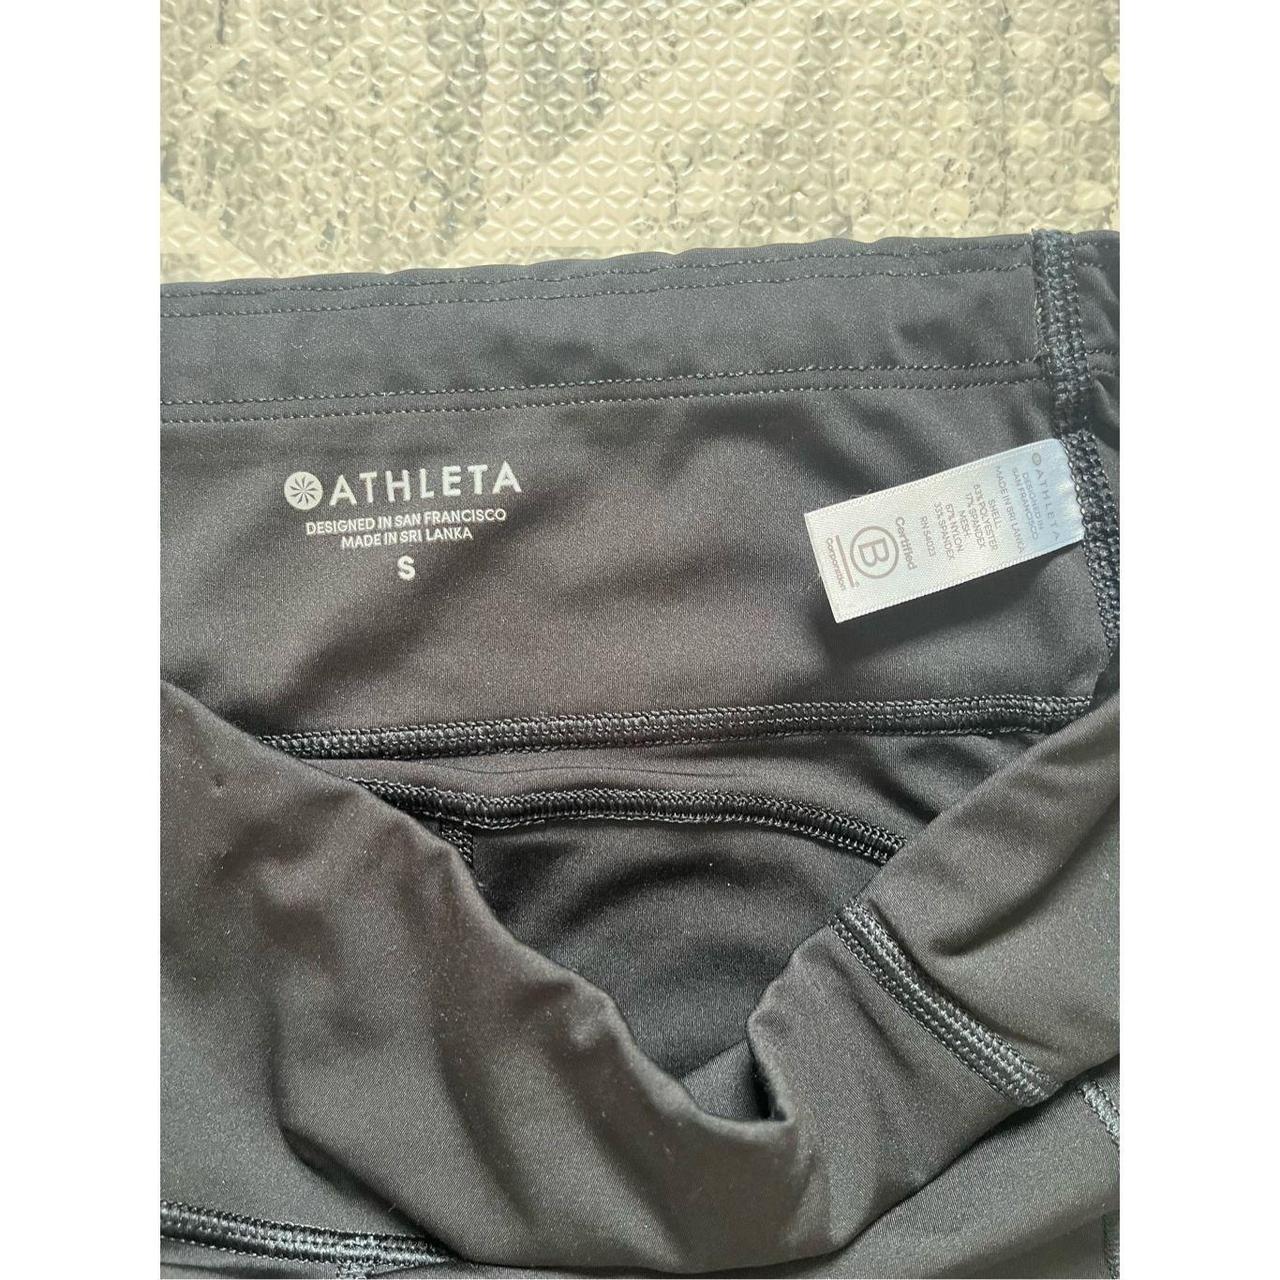 Elevate your style and comfort with the Athleta - Depop